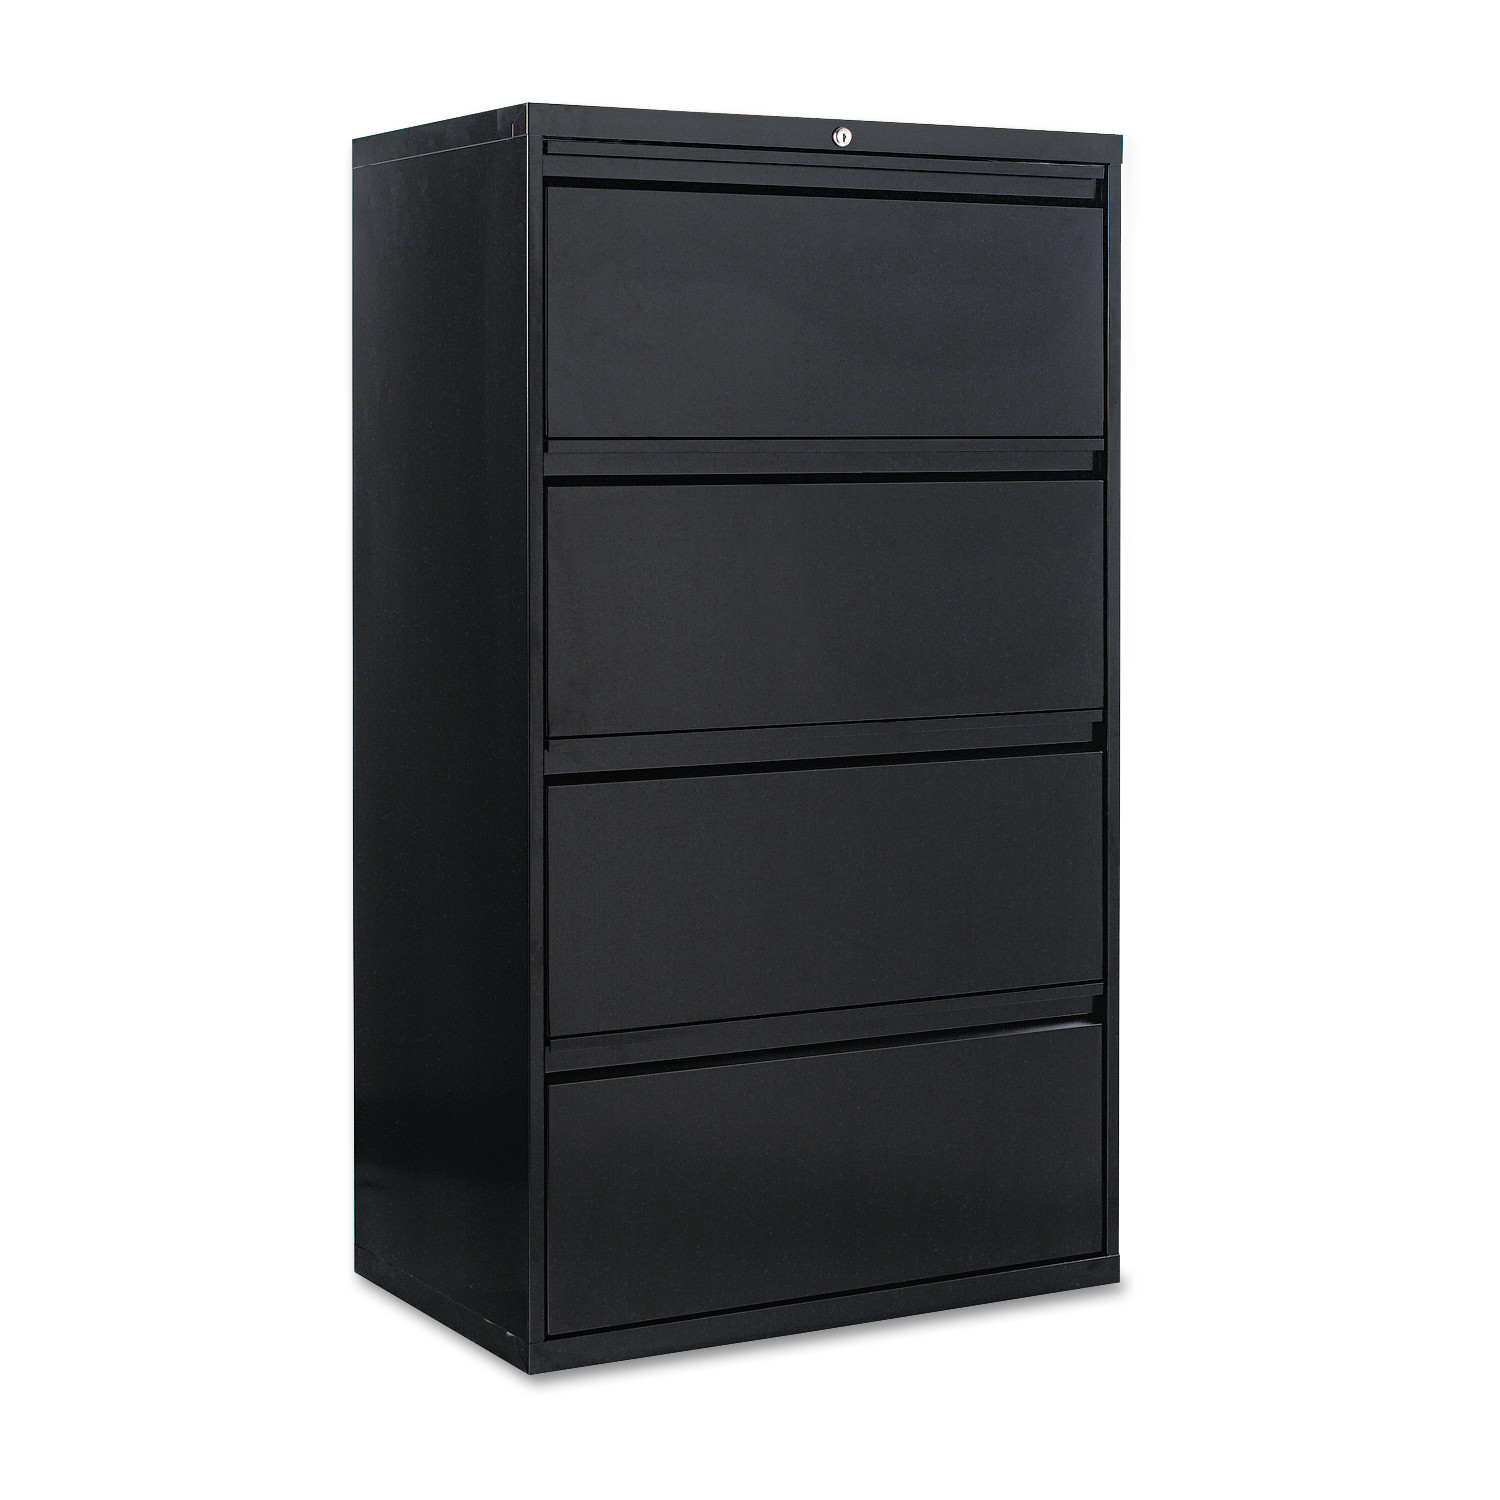 Alera 4 Drawers Lateral Lockable Filing Cabinet, Black - image 1 of 3